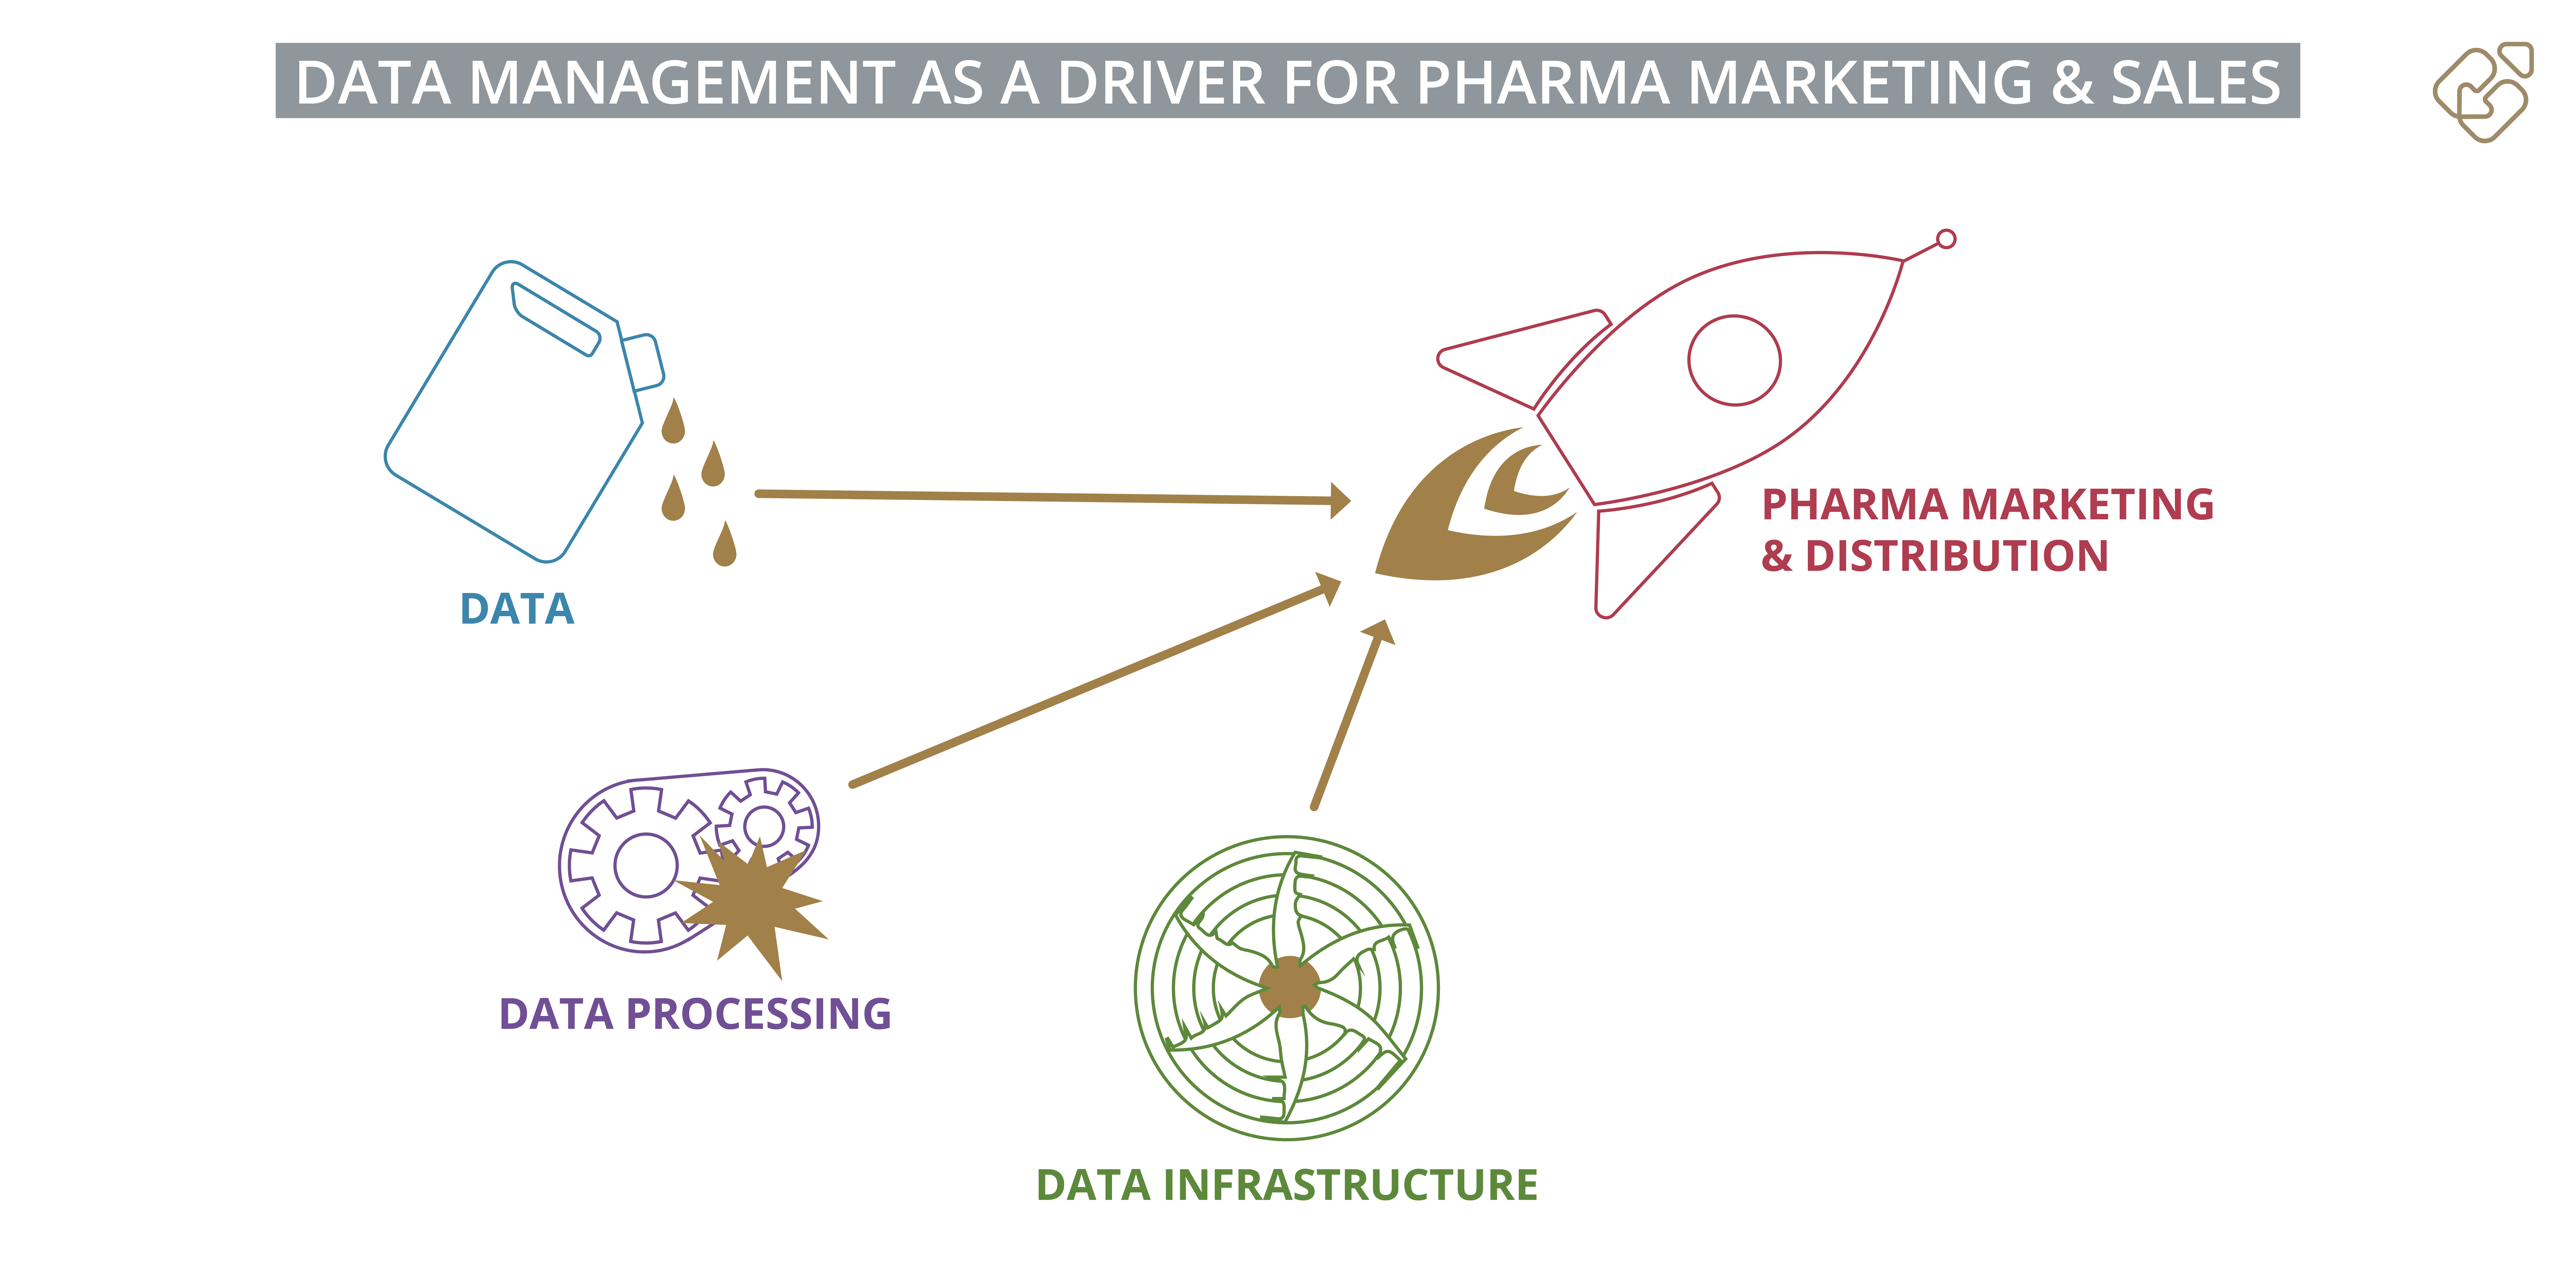 Data Management as a Driver for Pharma Marketing & Sales in Omnichannel Pharma Marketing